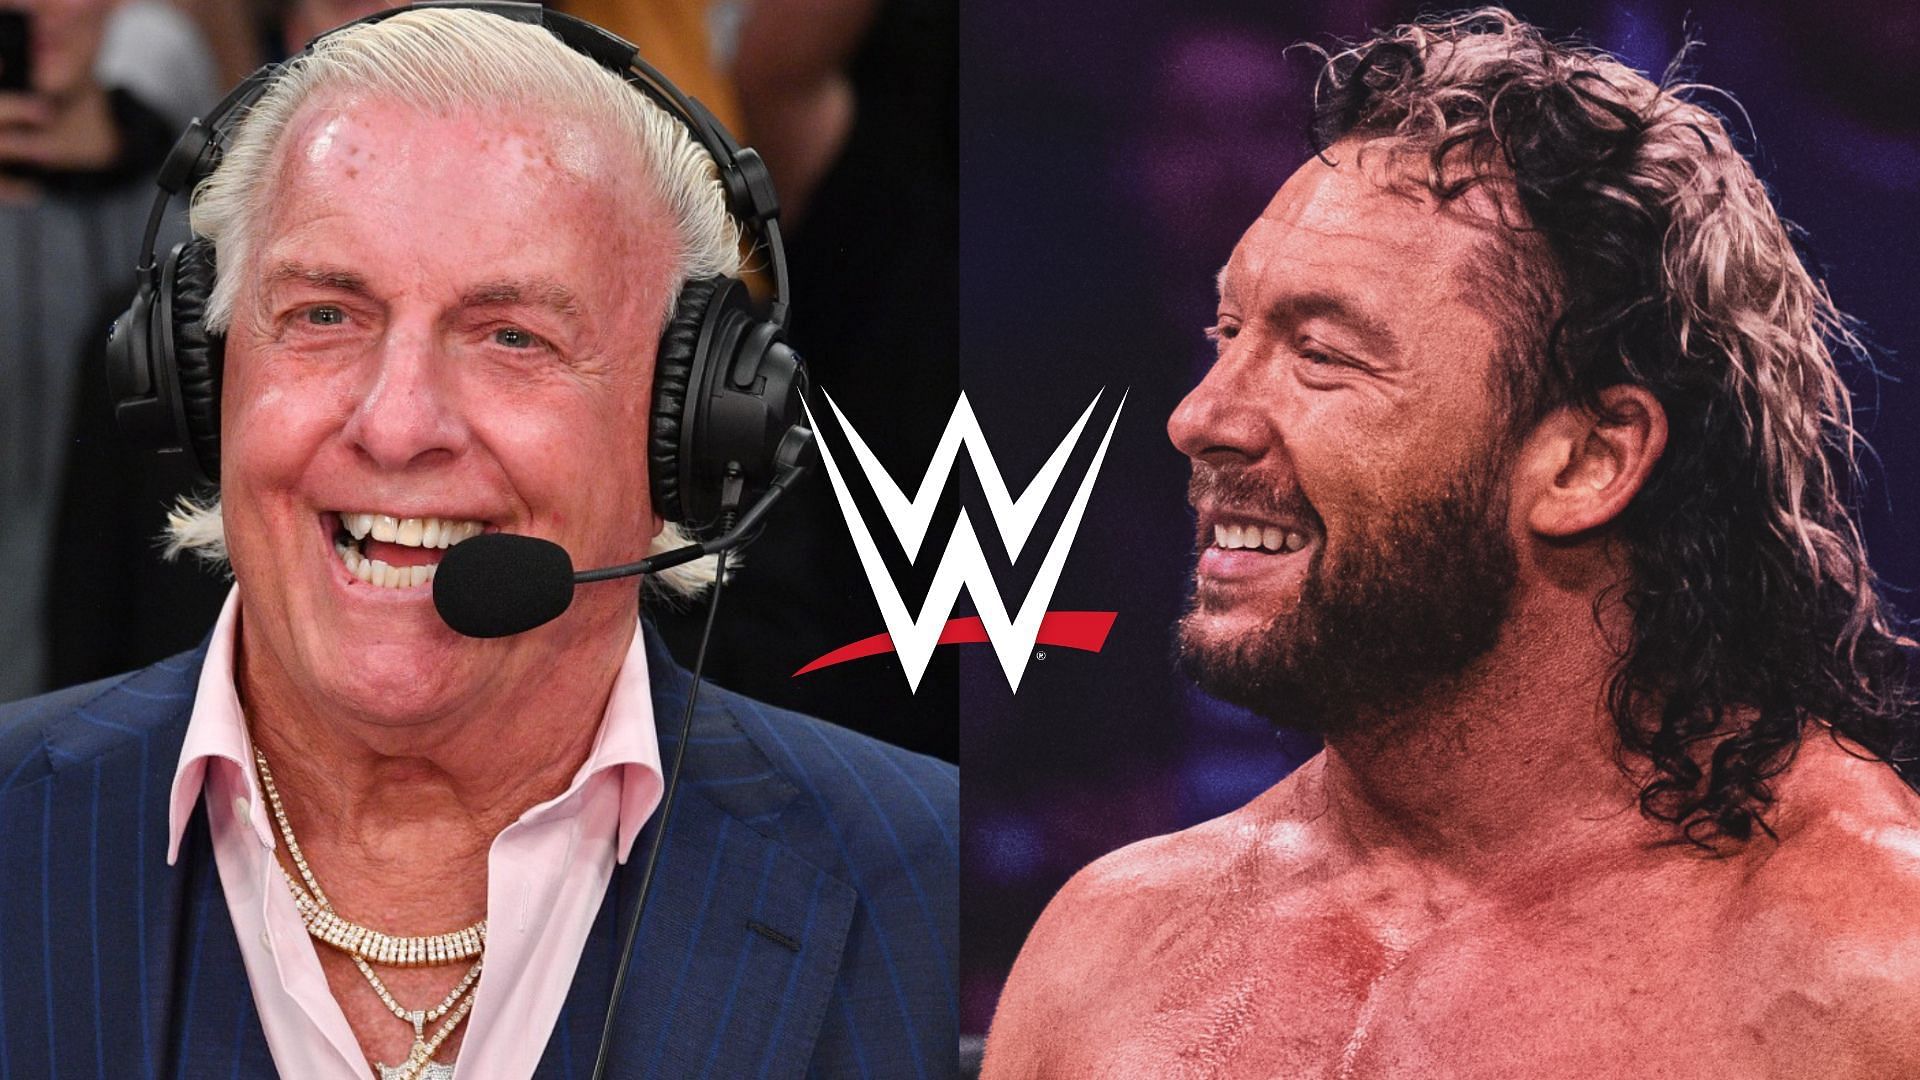 Does Ric Flair think Kenny Omega is better than a former WWE Champion?